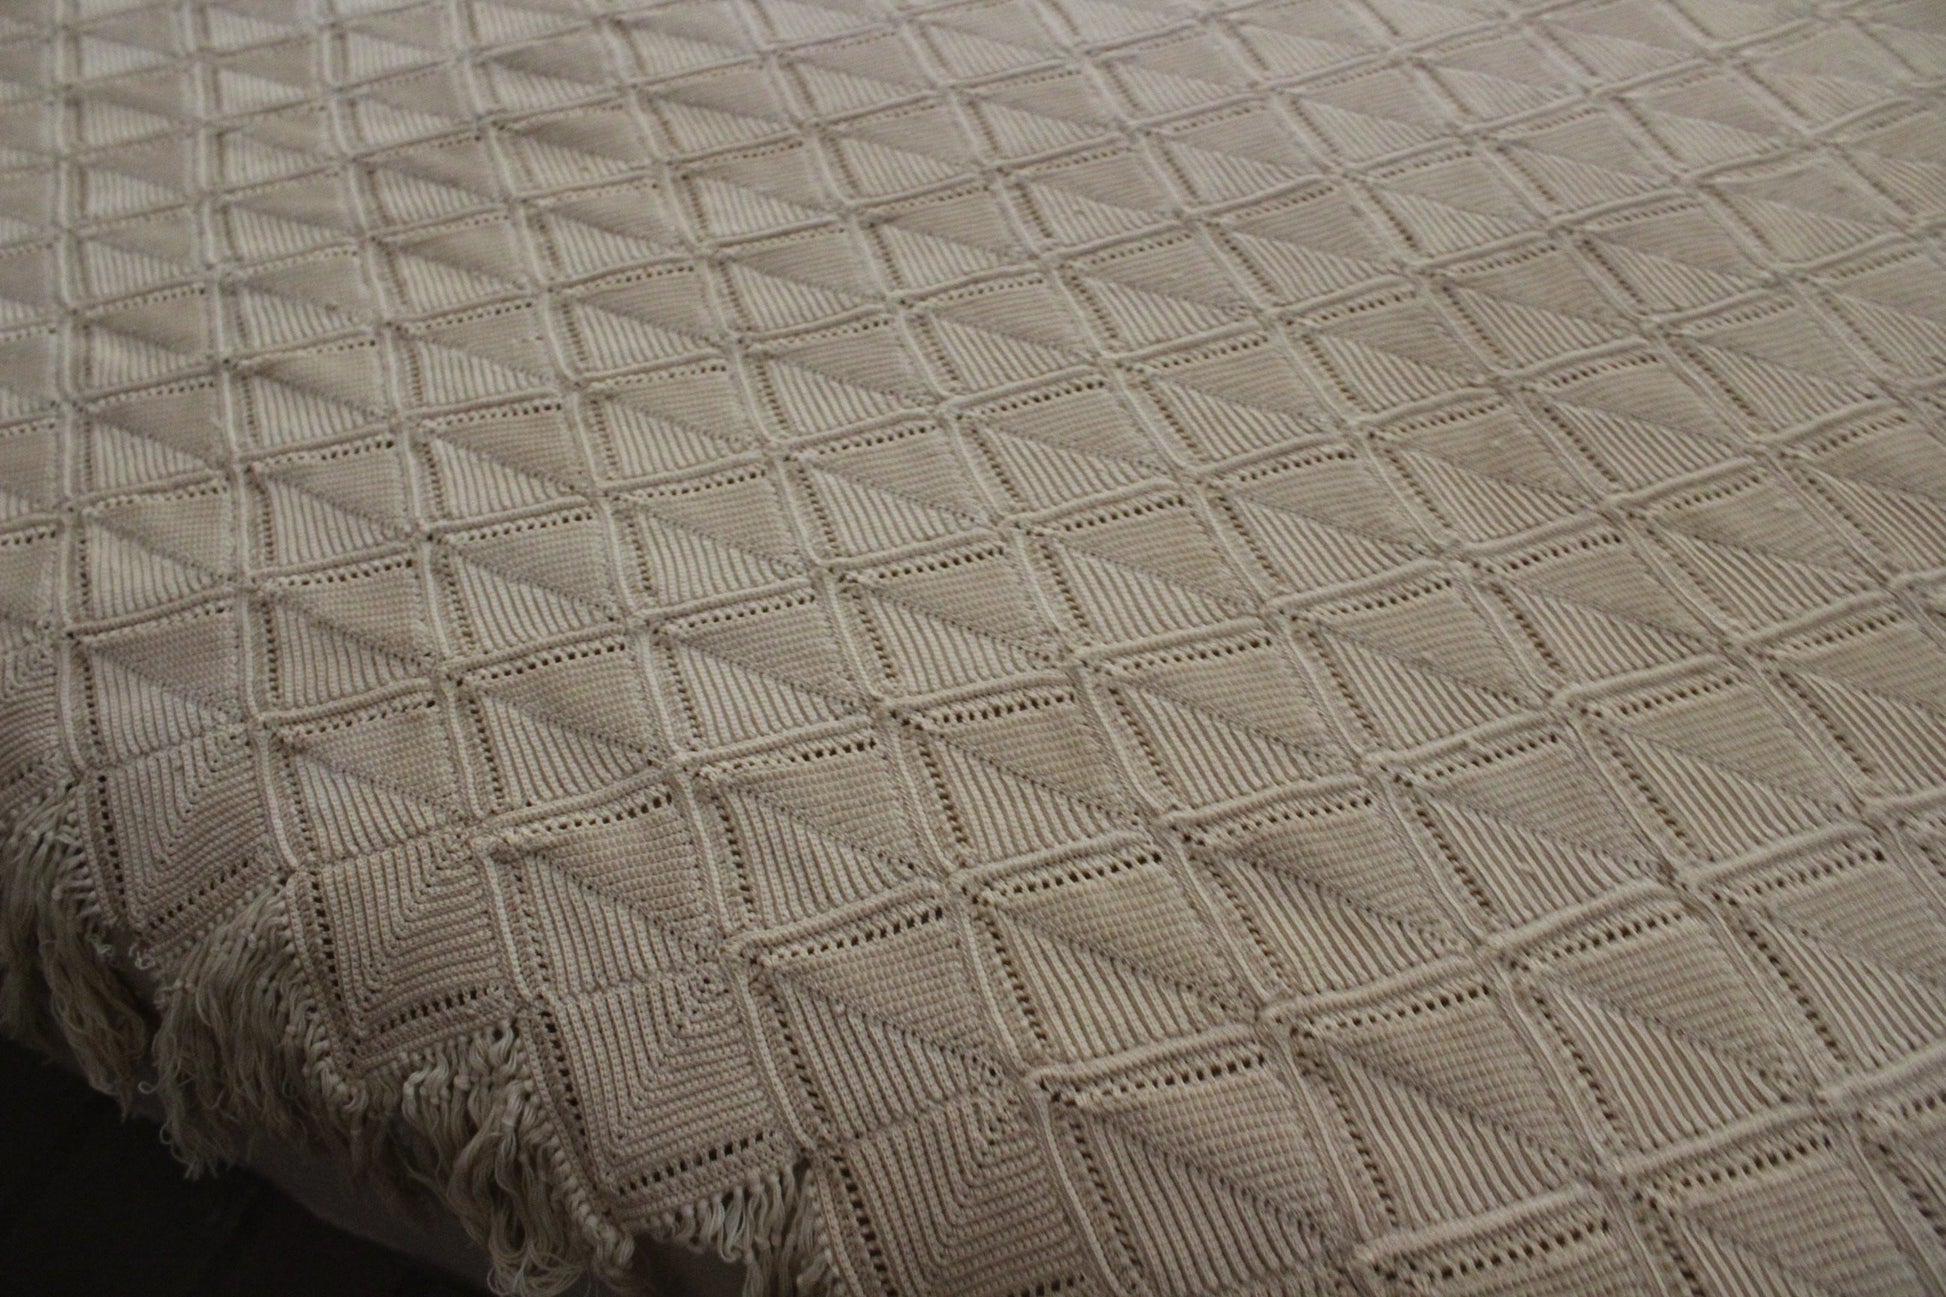 Hand Made Antique Cotton Crochet Coverlet Bedspread - Echru - 76" X 78" Cotton mitered square